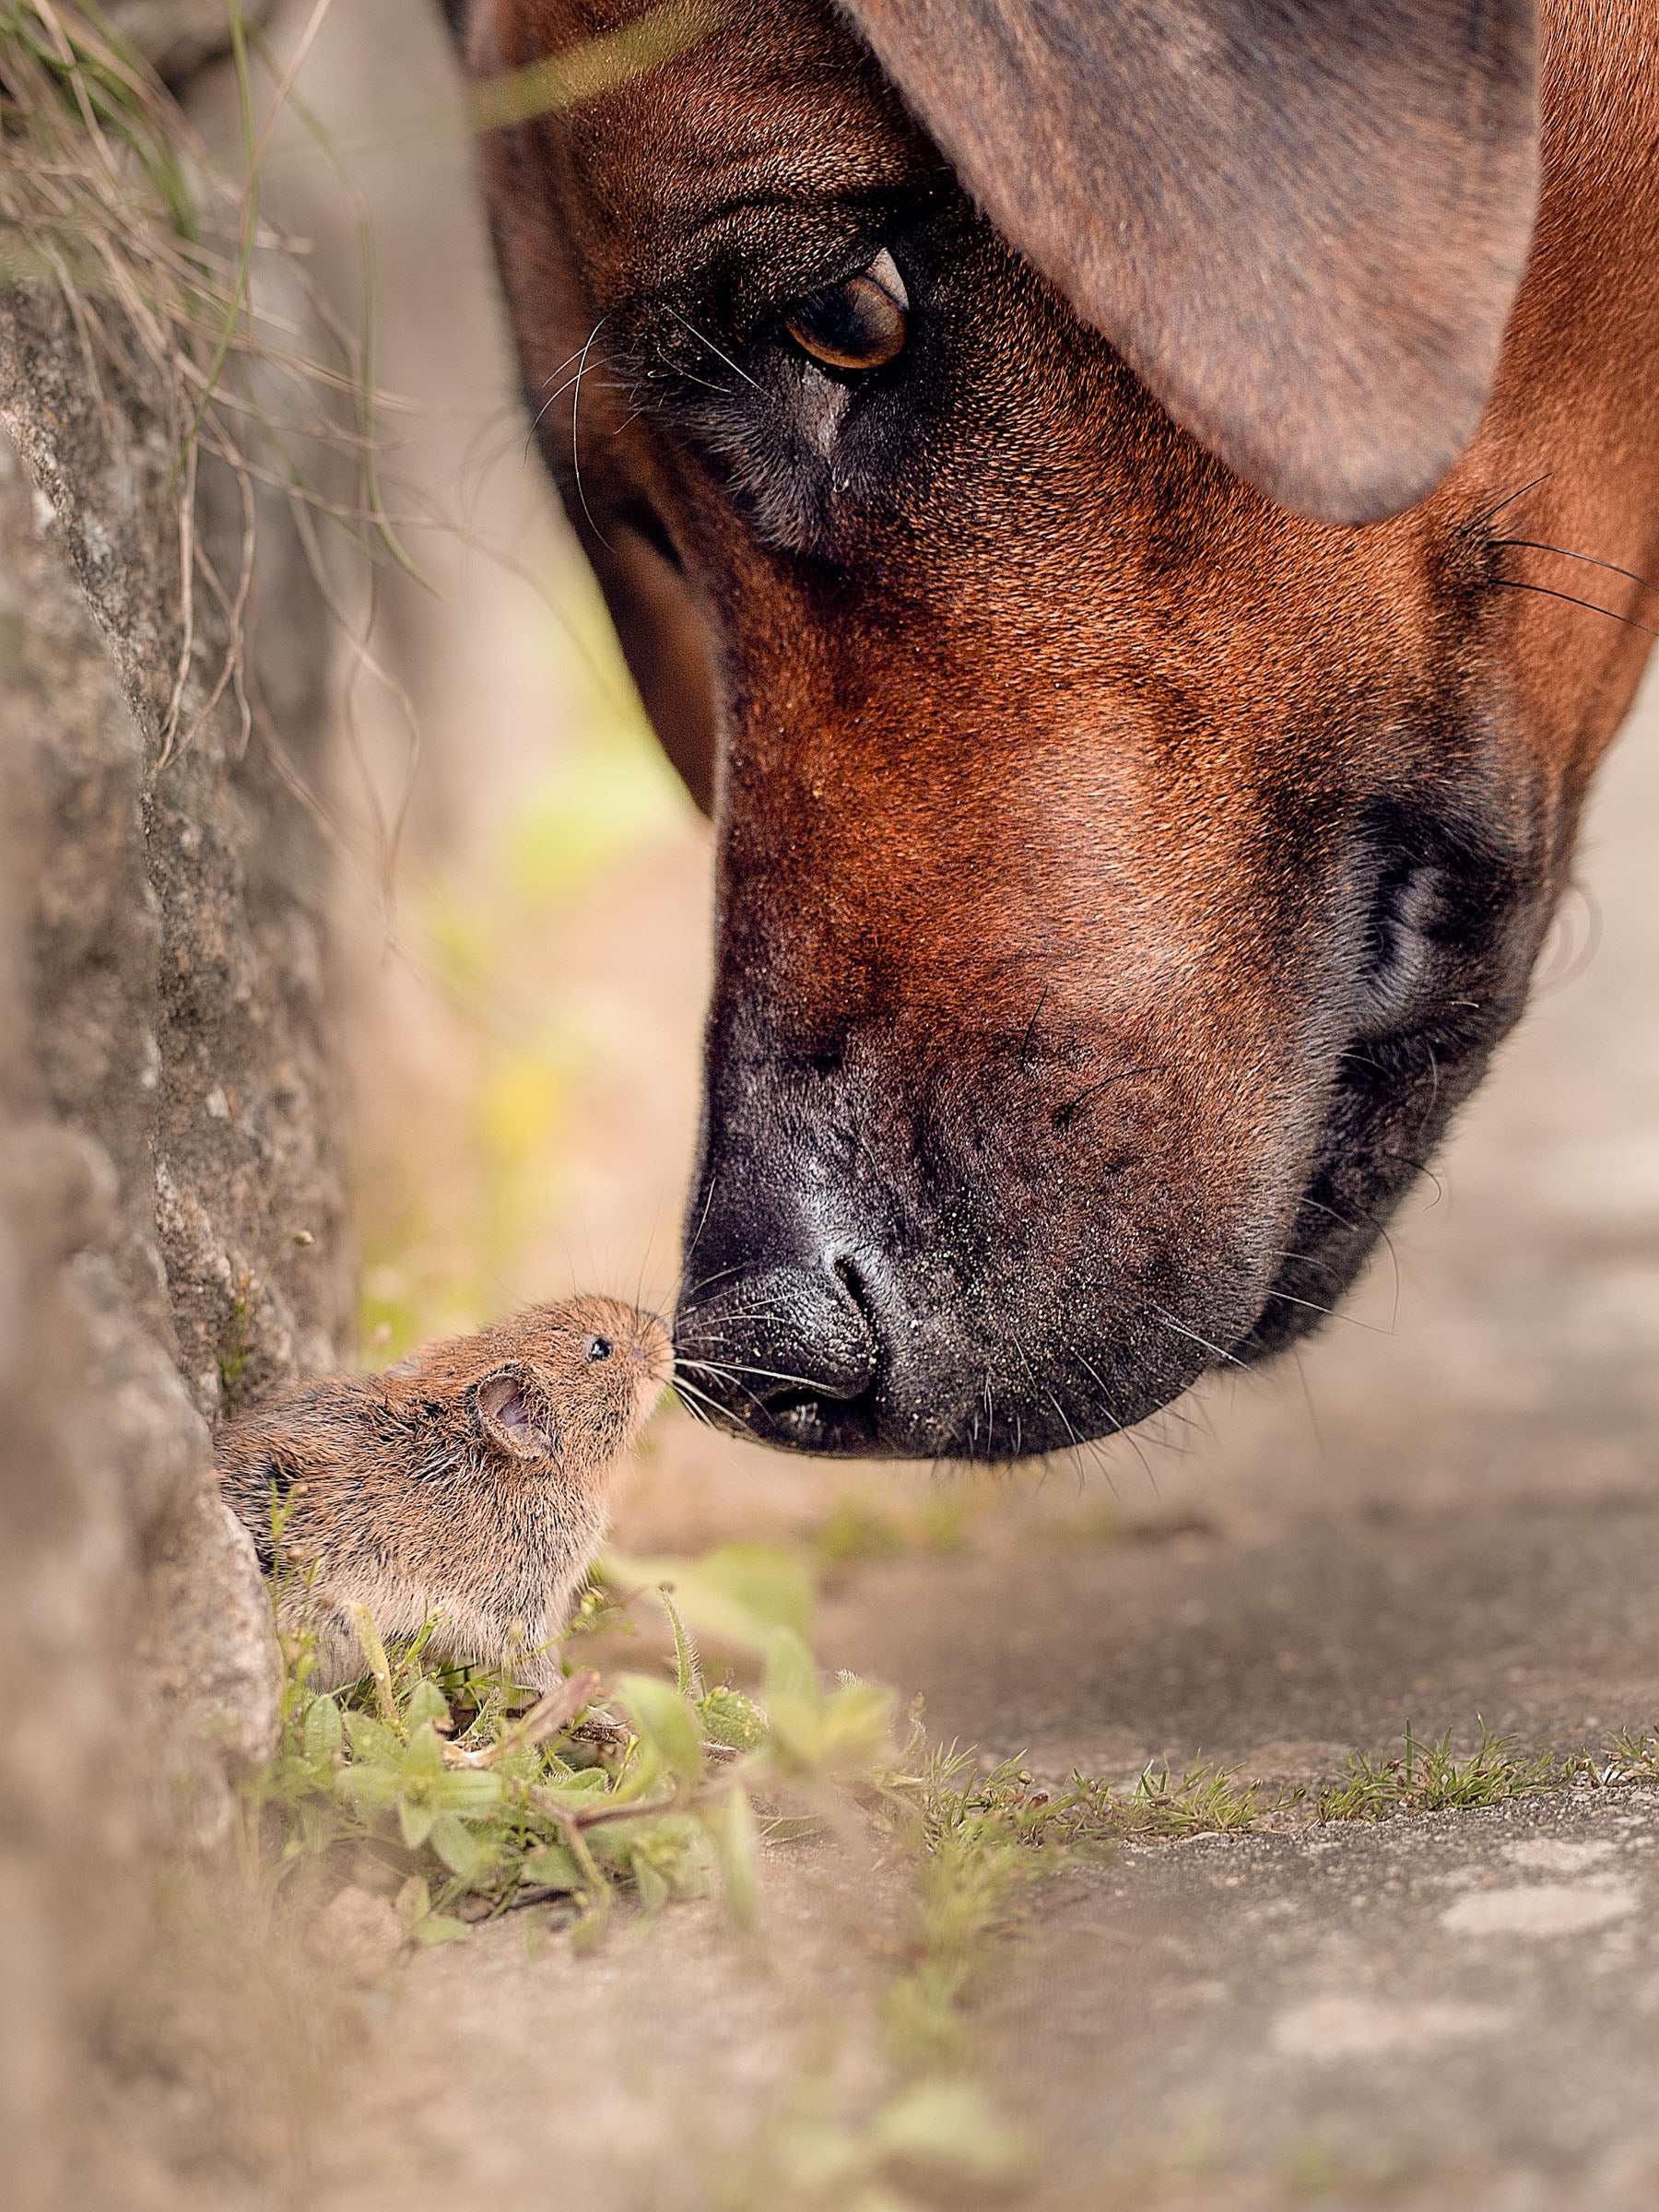 A large dog puts its nose up to the nose of a tiny mouse